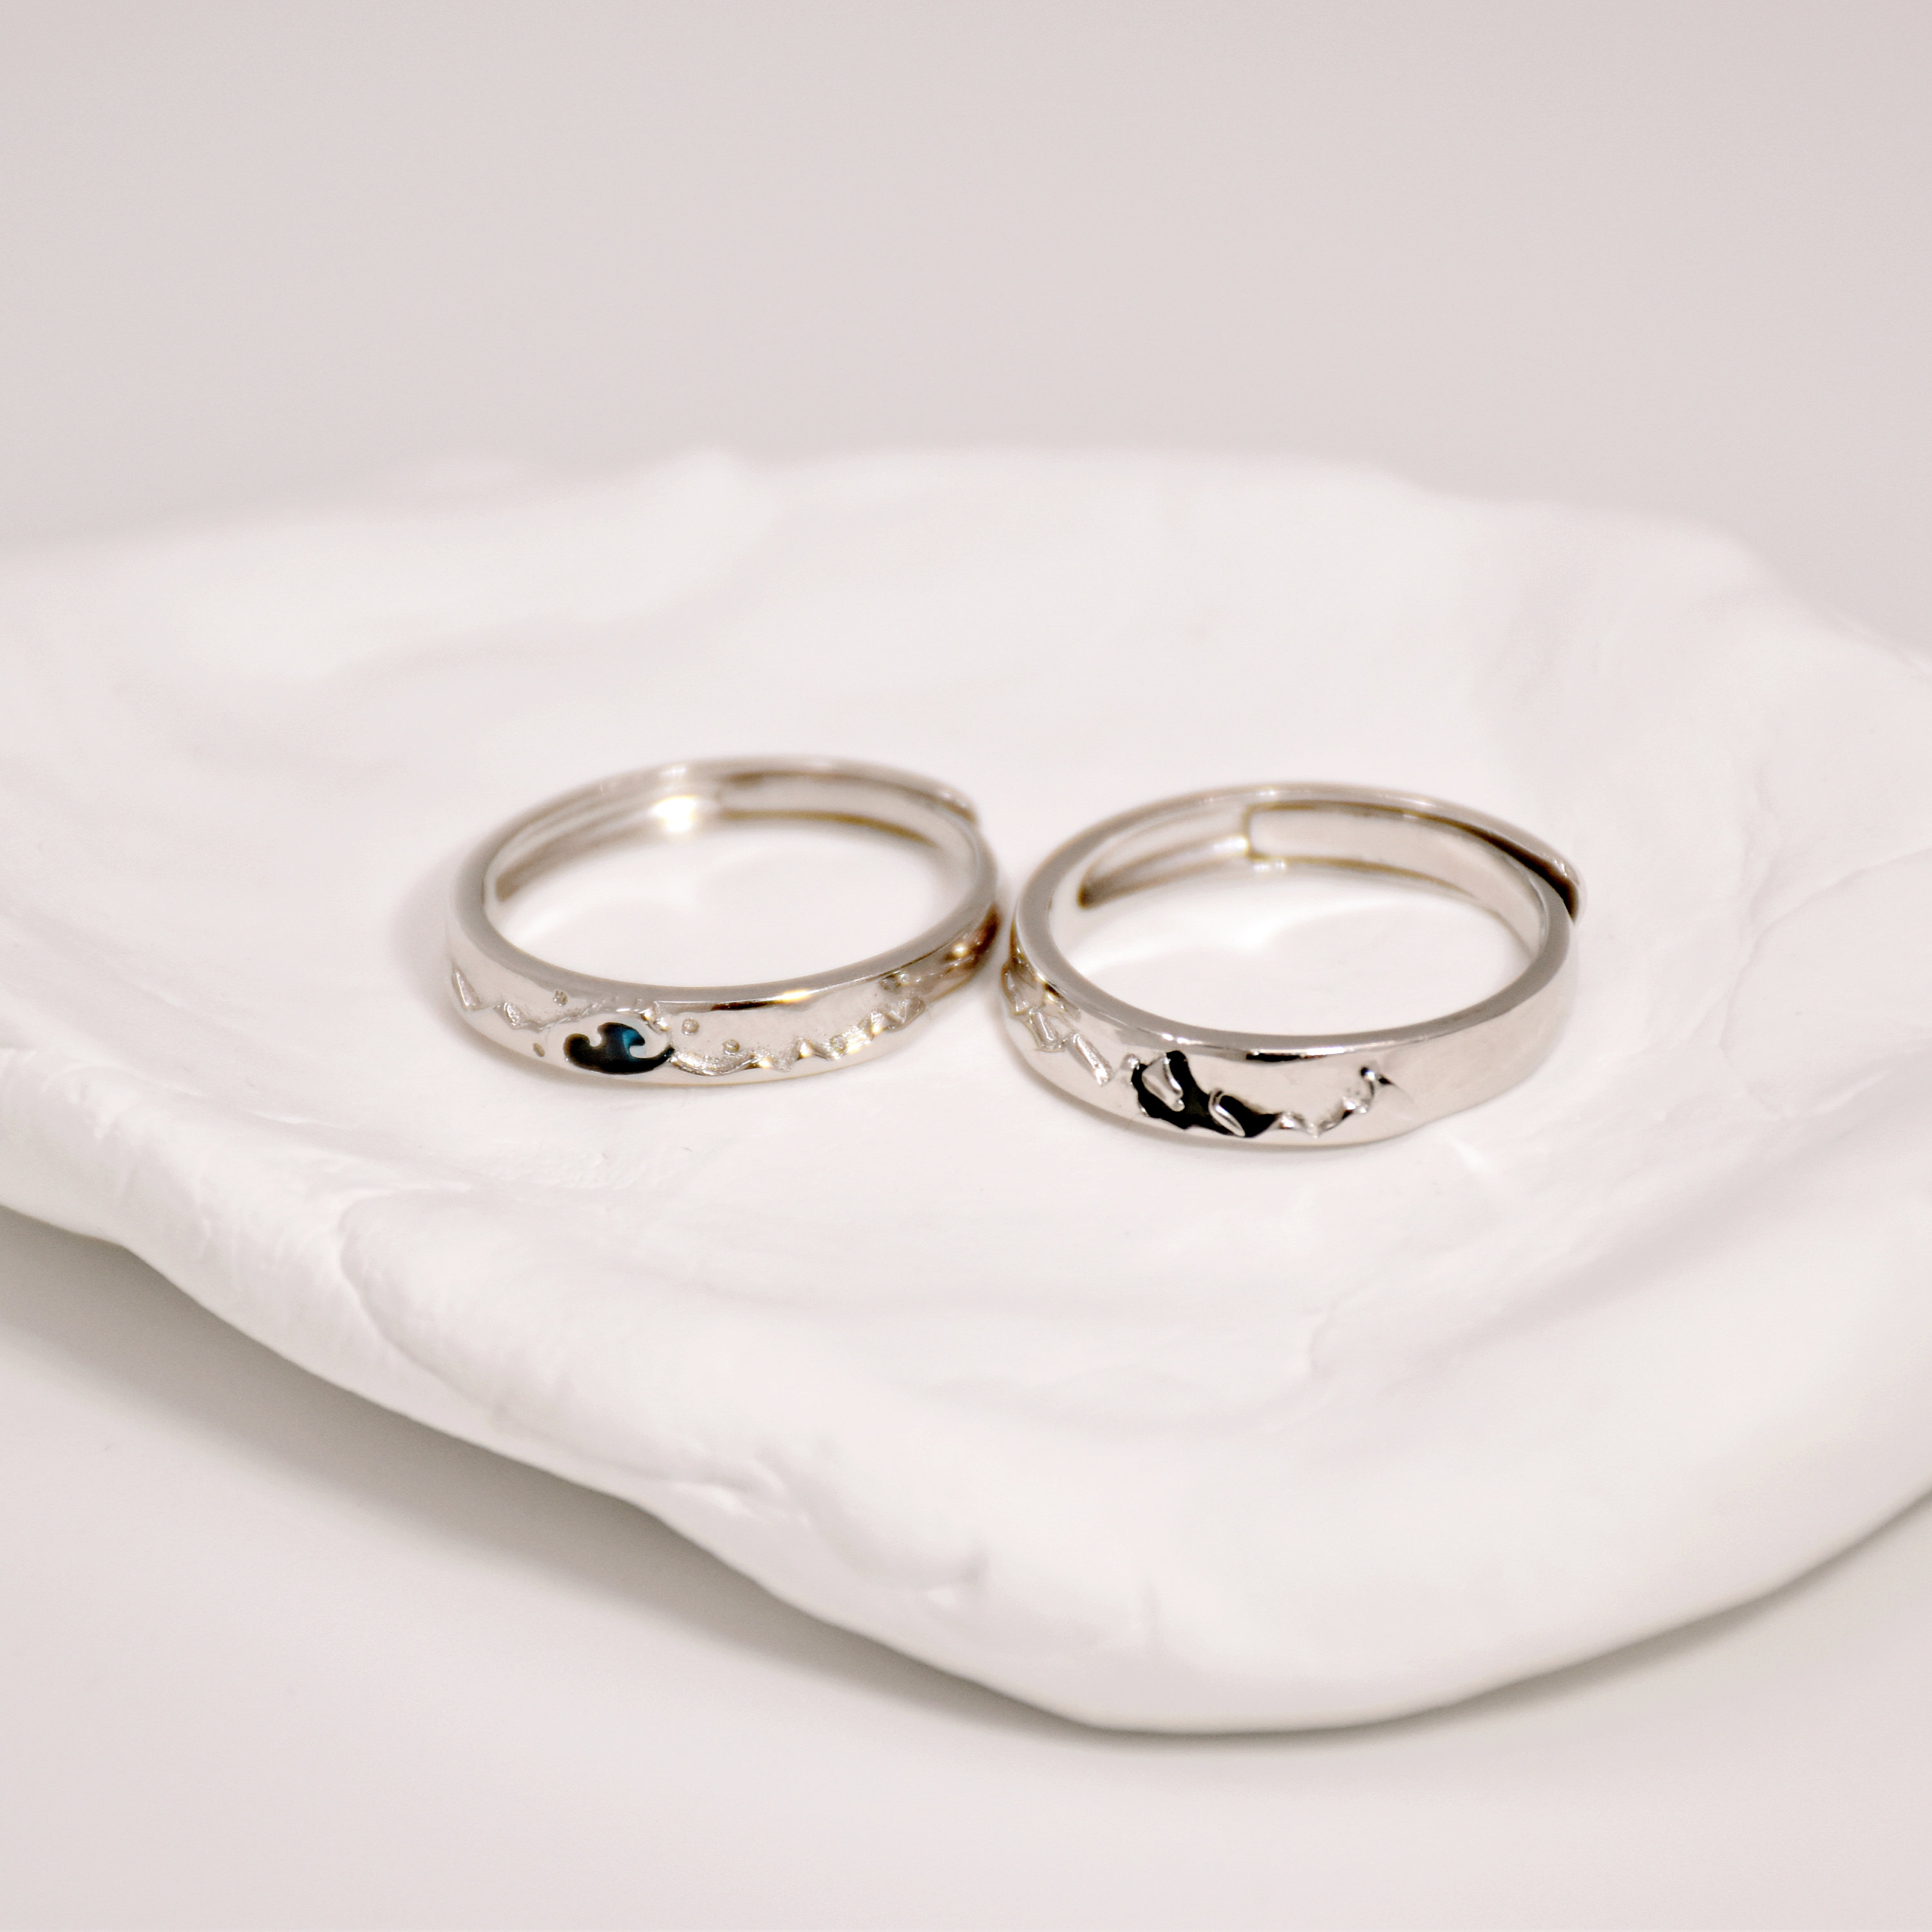 Couple Rings Set Sun Moon Sterling Silver Matching Promise Rings for Couples  | eBay